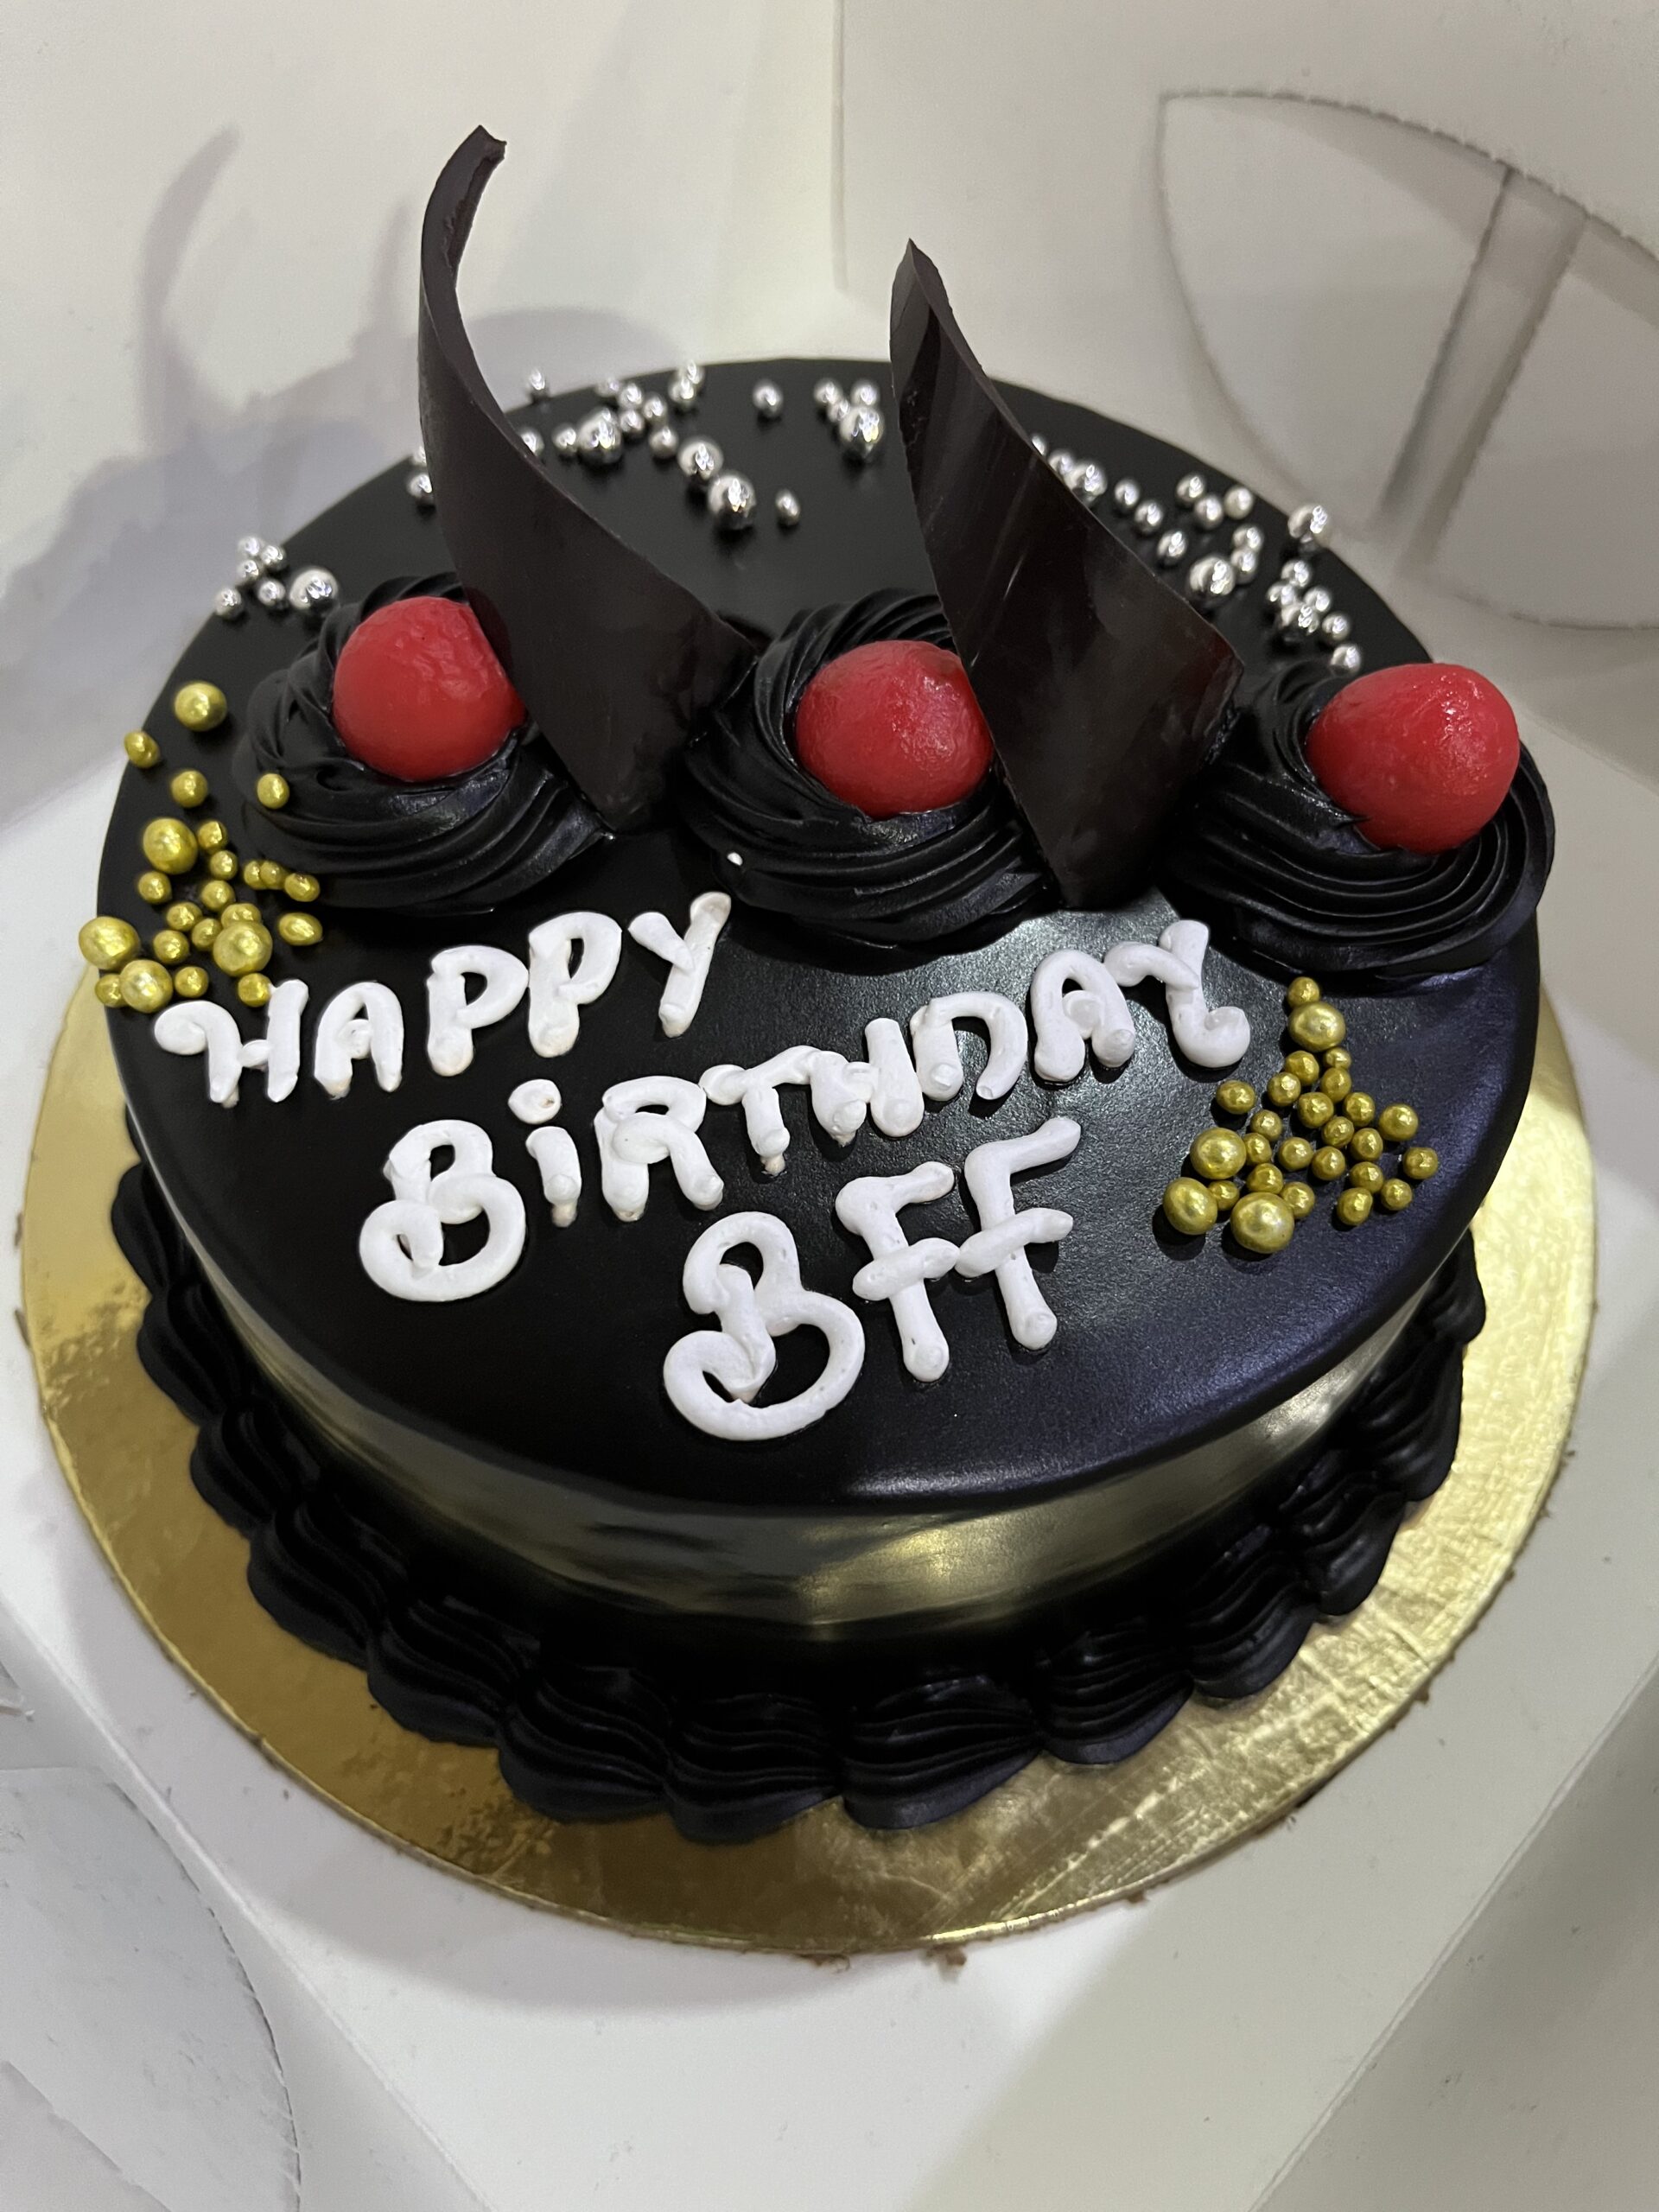 Choco Truffle cake - order from online cake shop for home delivery  coimbatore